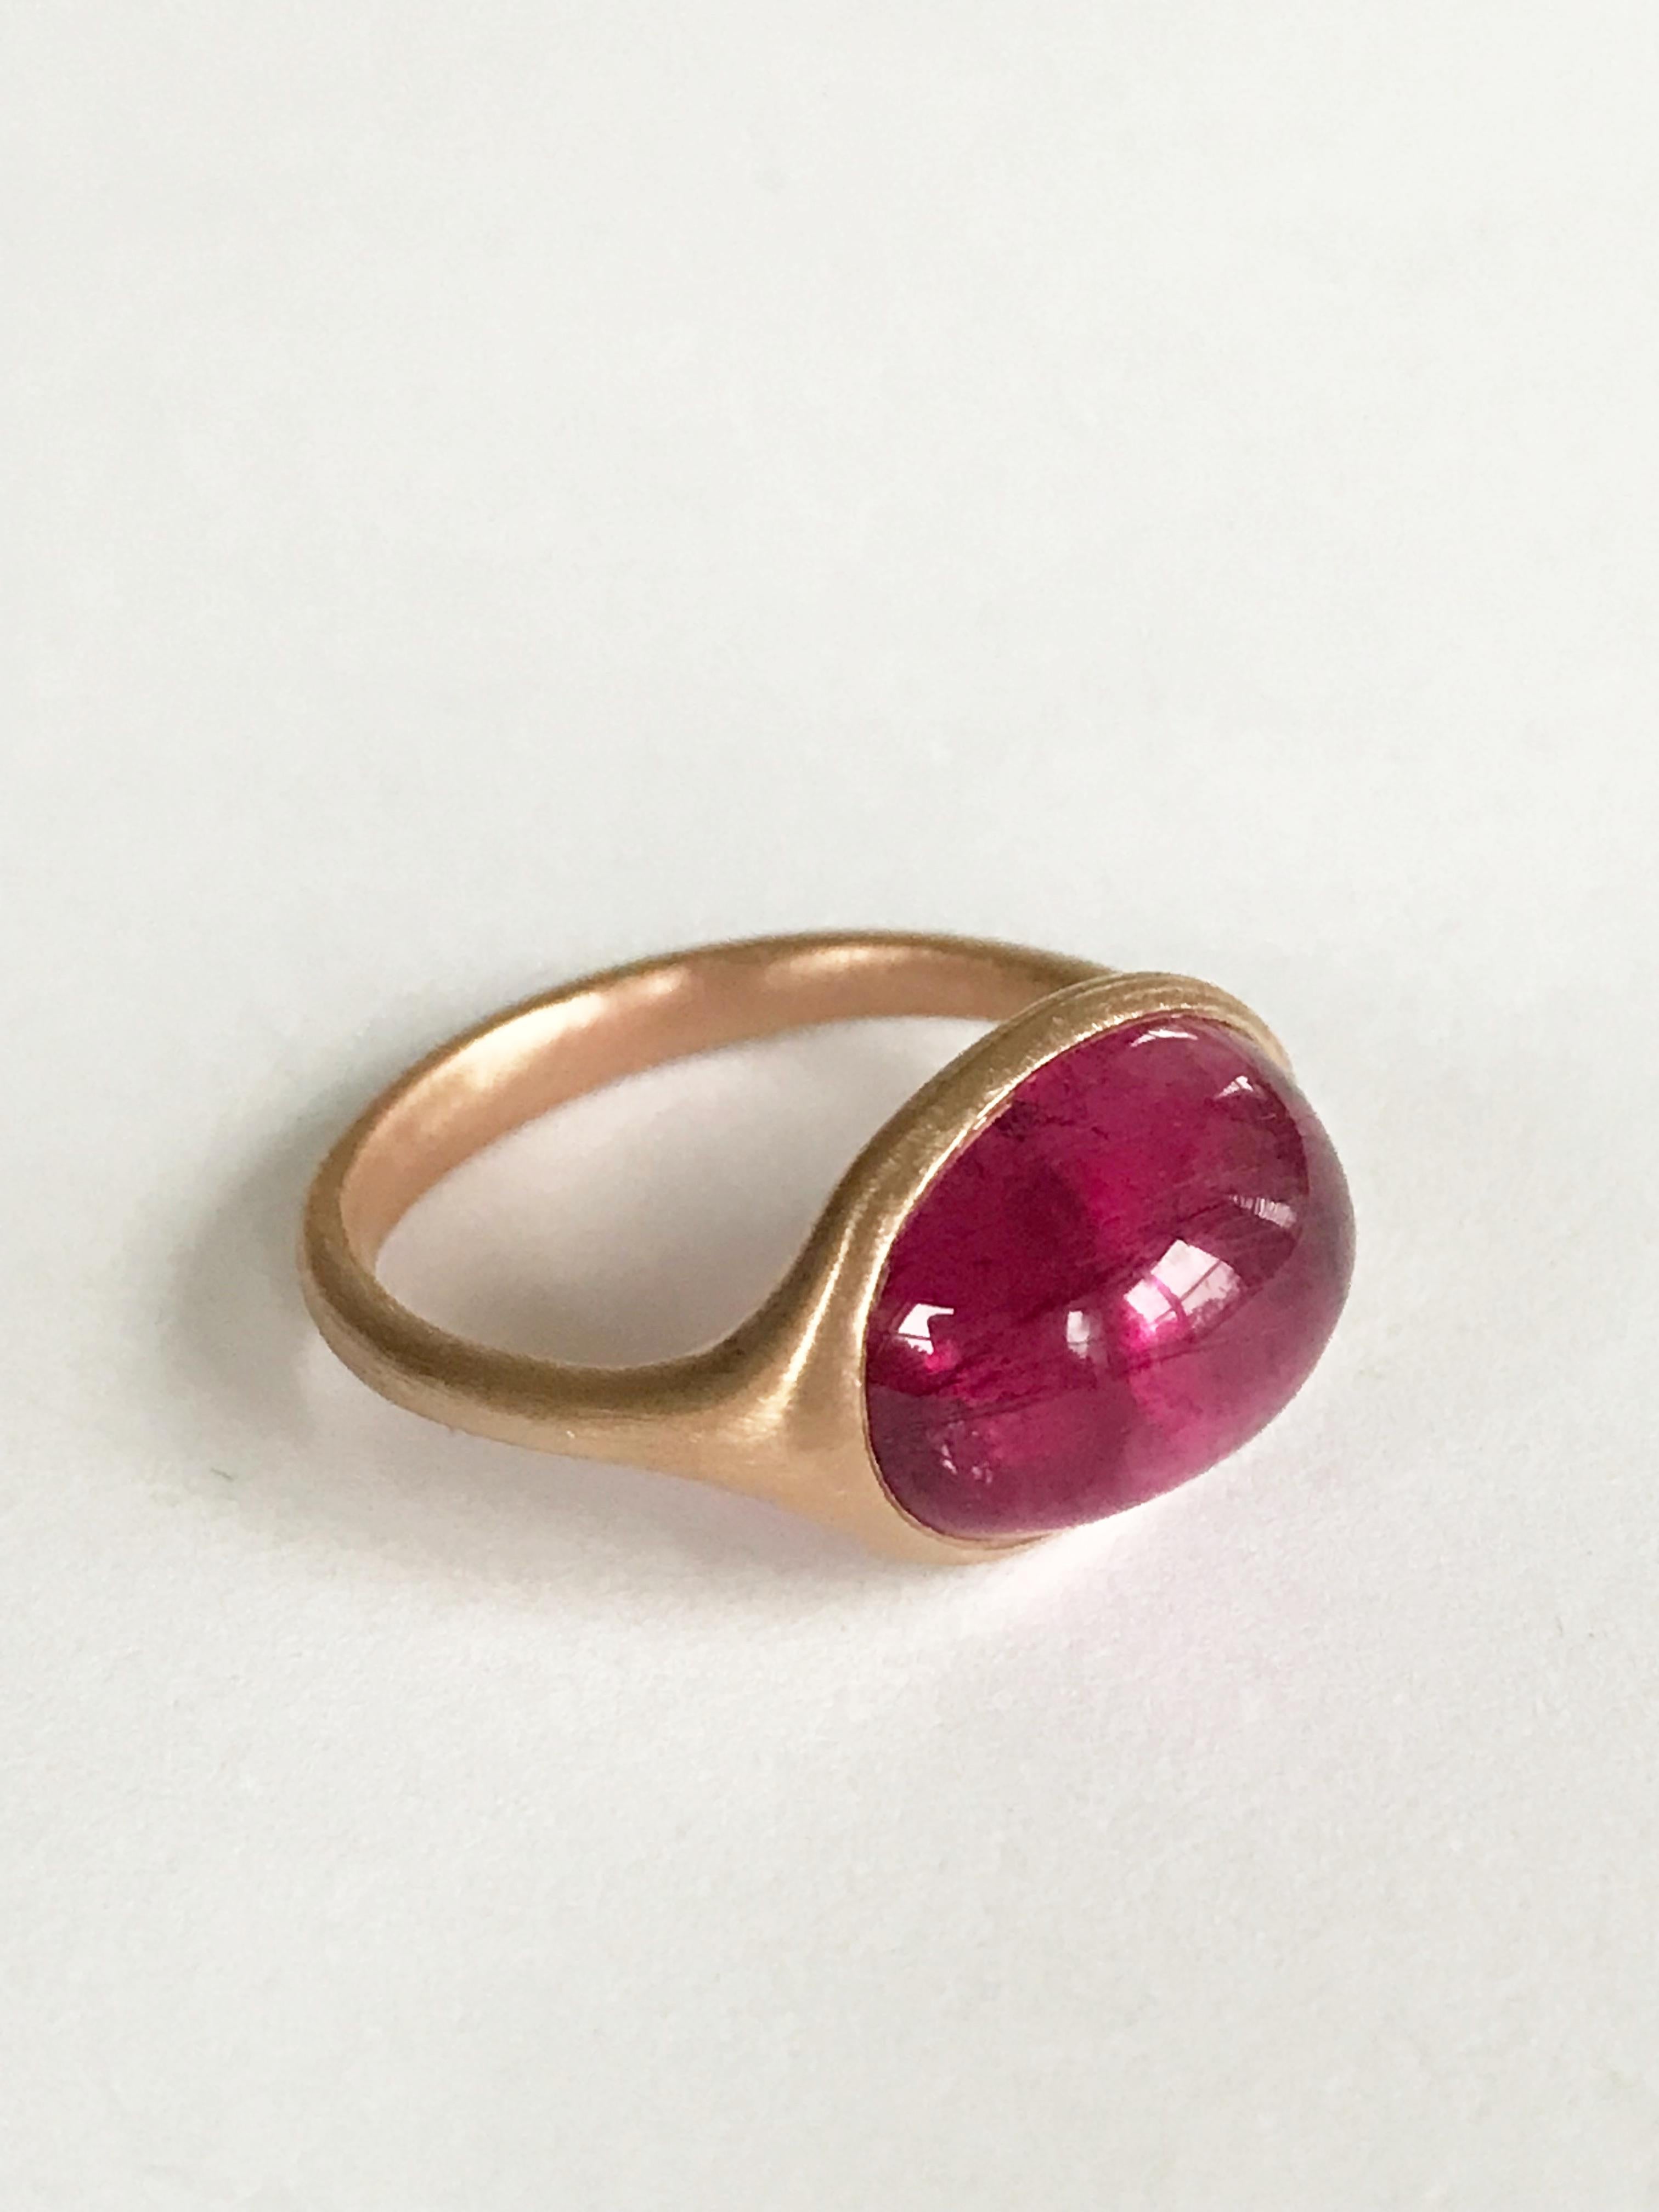 Dalben design  18k rose gold matte finishing ring with a 7,64 carat bezel-set oval cabochon cut Rubellite (red tourmaline) . 
Ring size 7 1/4 USA - EU 55 re-sizable to most finger sizes. 
Bezel stone dimensions :
height 11,4 mm
width 15 mm
The ring